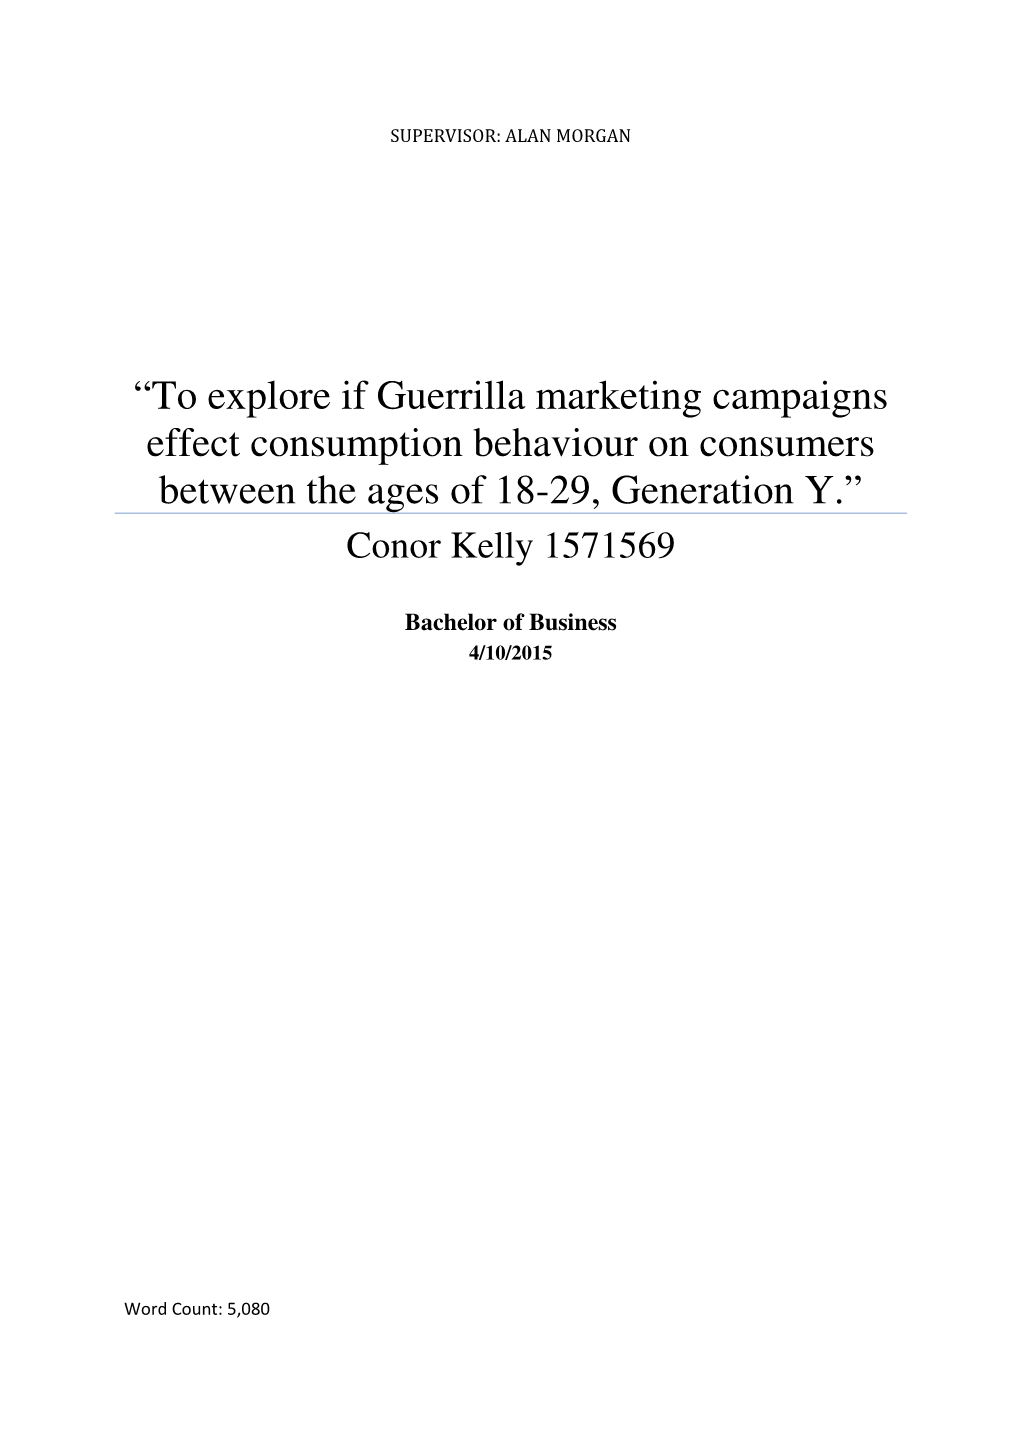 “To Explore If Guerrilla Marketing Campaigns Effect Consumption Behaviour on Consumers Between the Ages of 18-29, Generation Y.” Conor Kelly 1571569